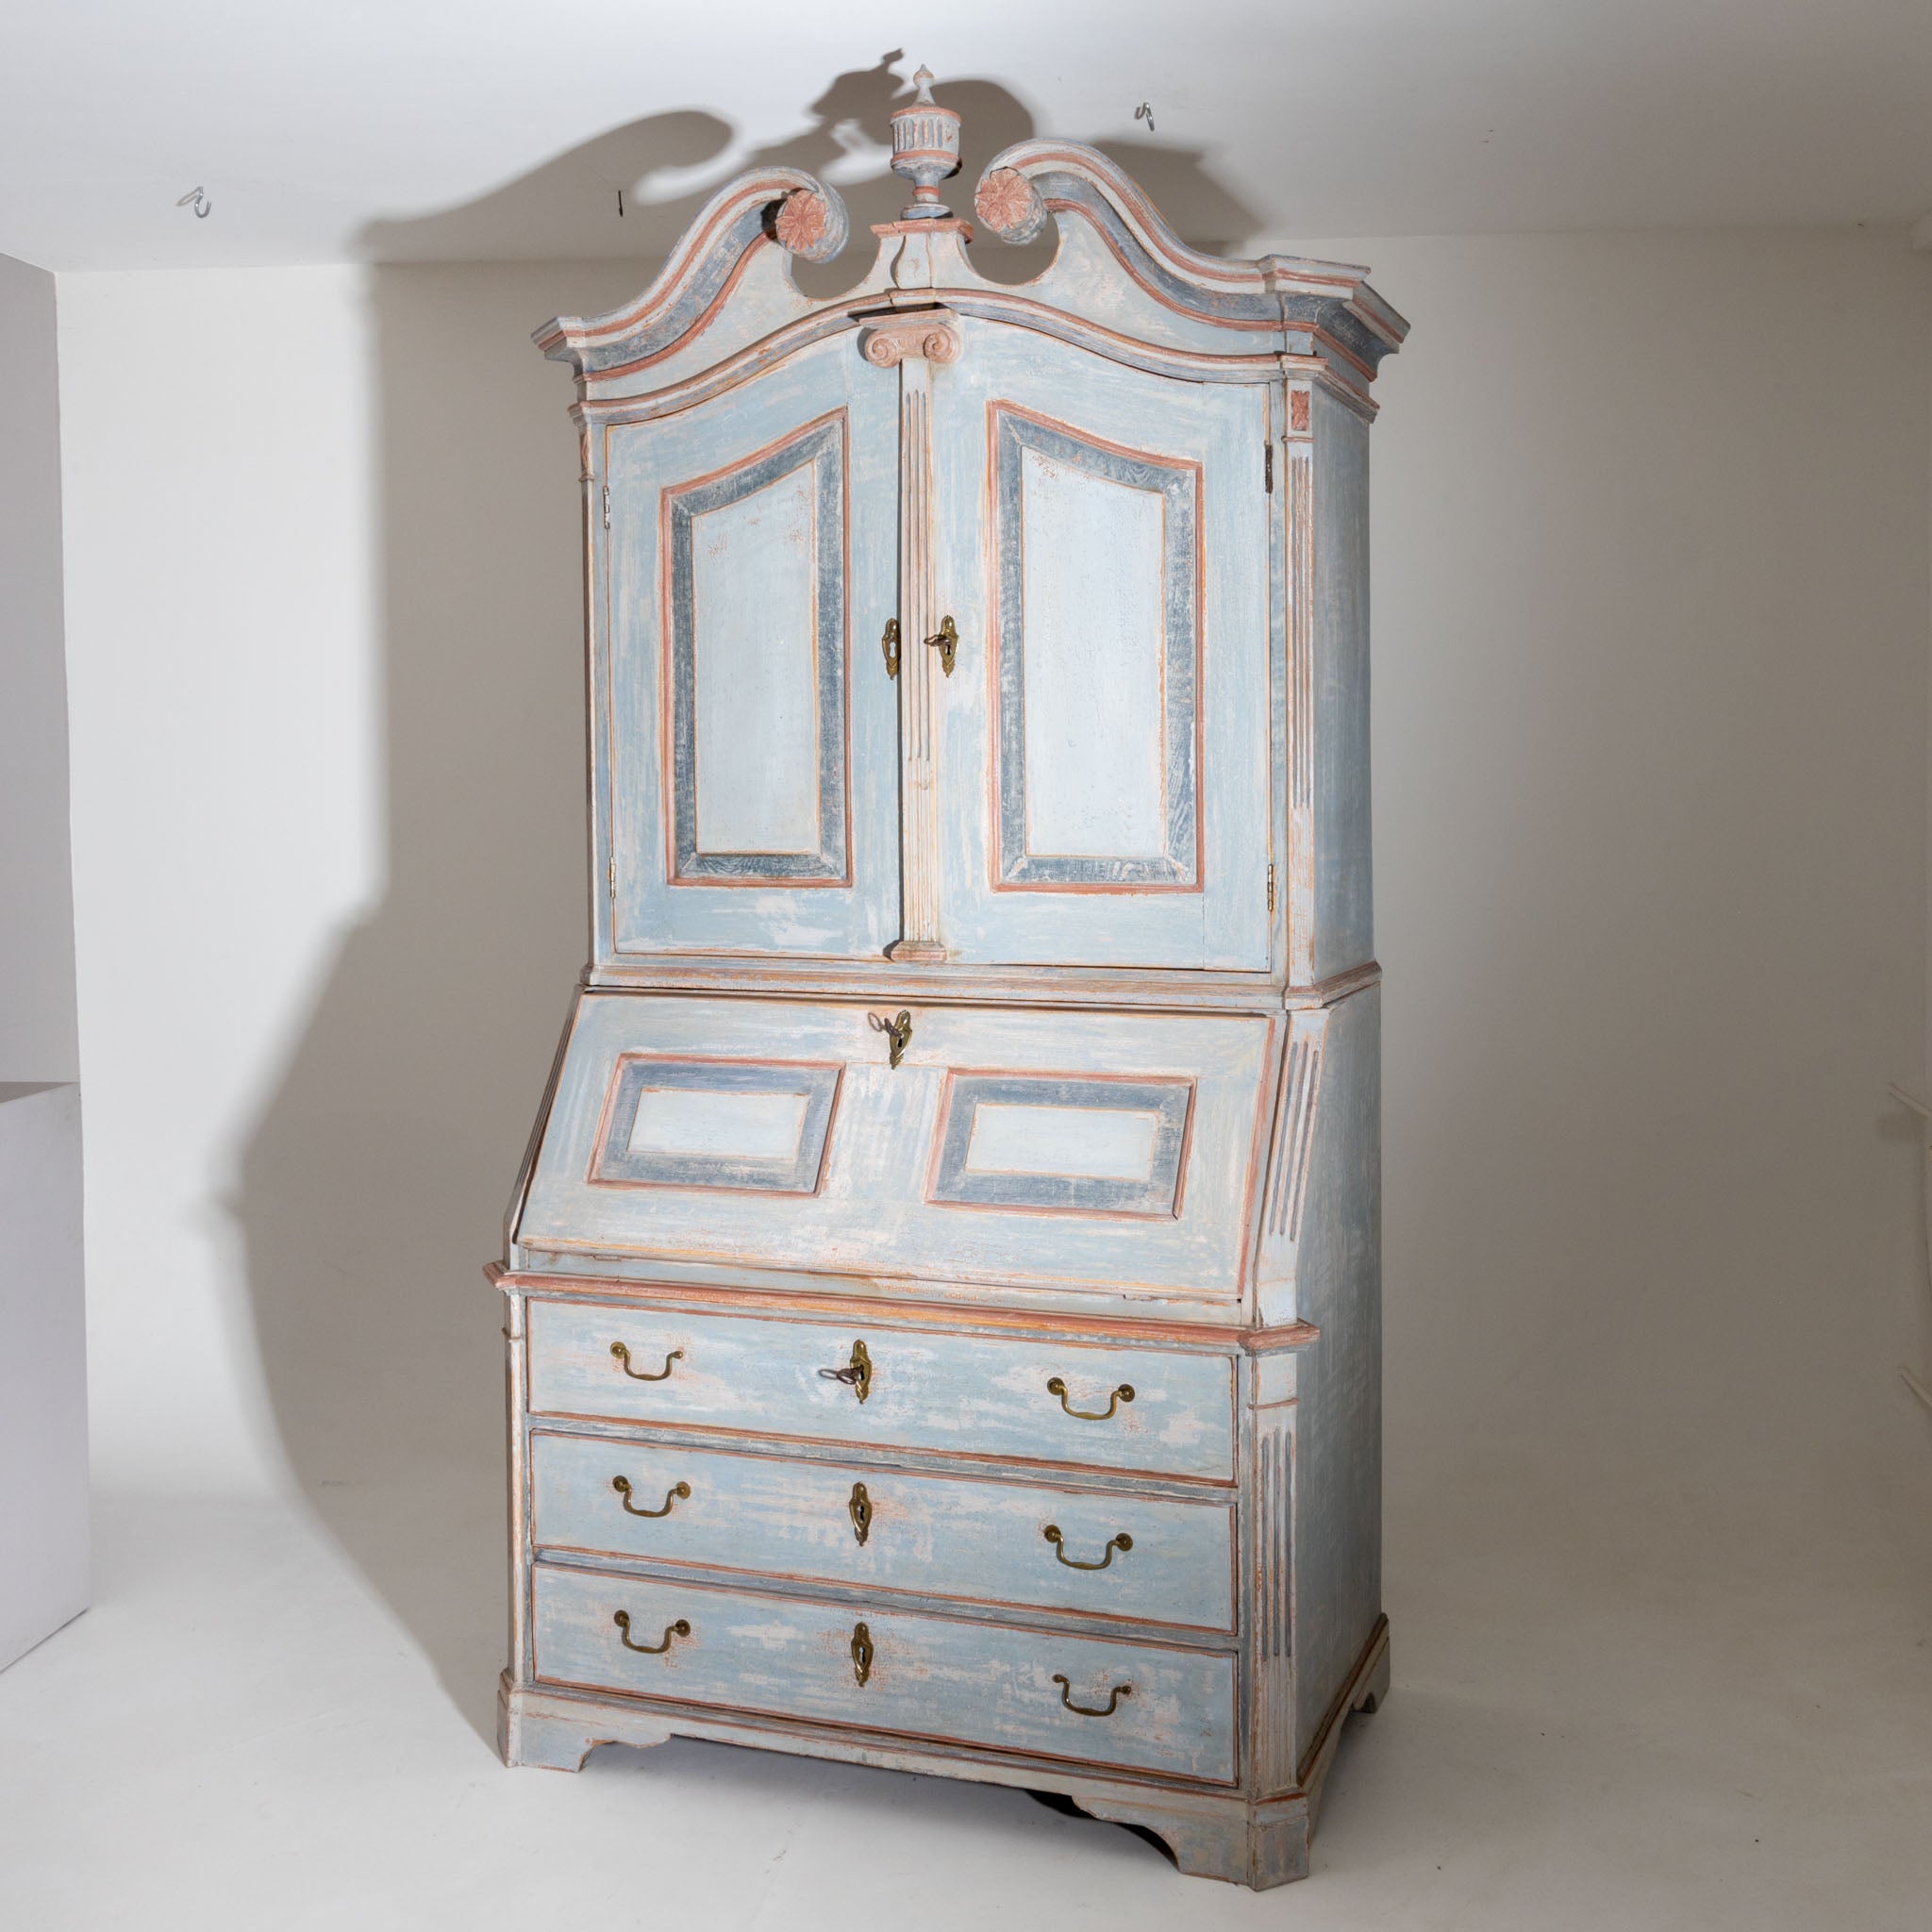 Hand-Painted Hand Painted Gustavian-Style Secretaire in Blue and Red, 18th Century